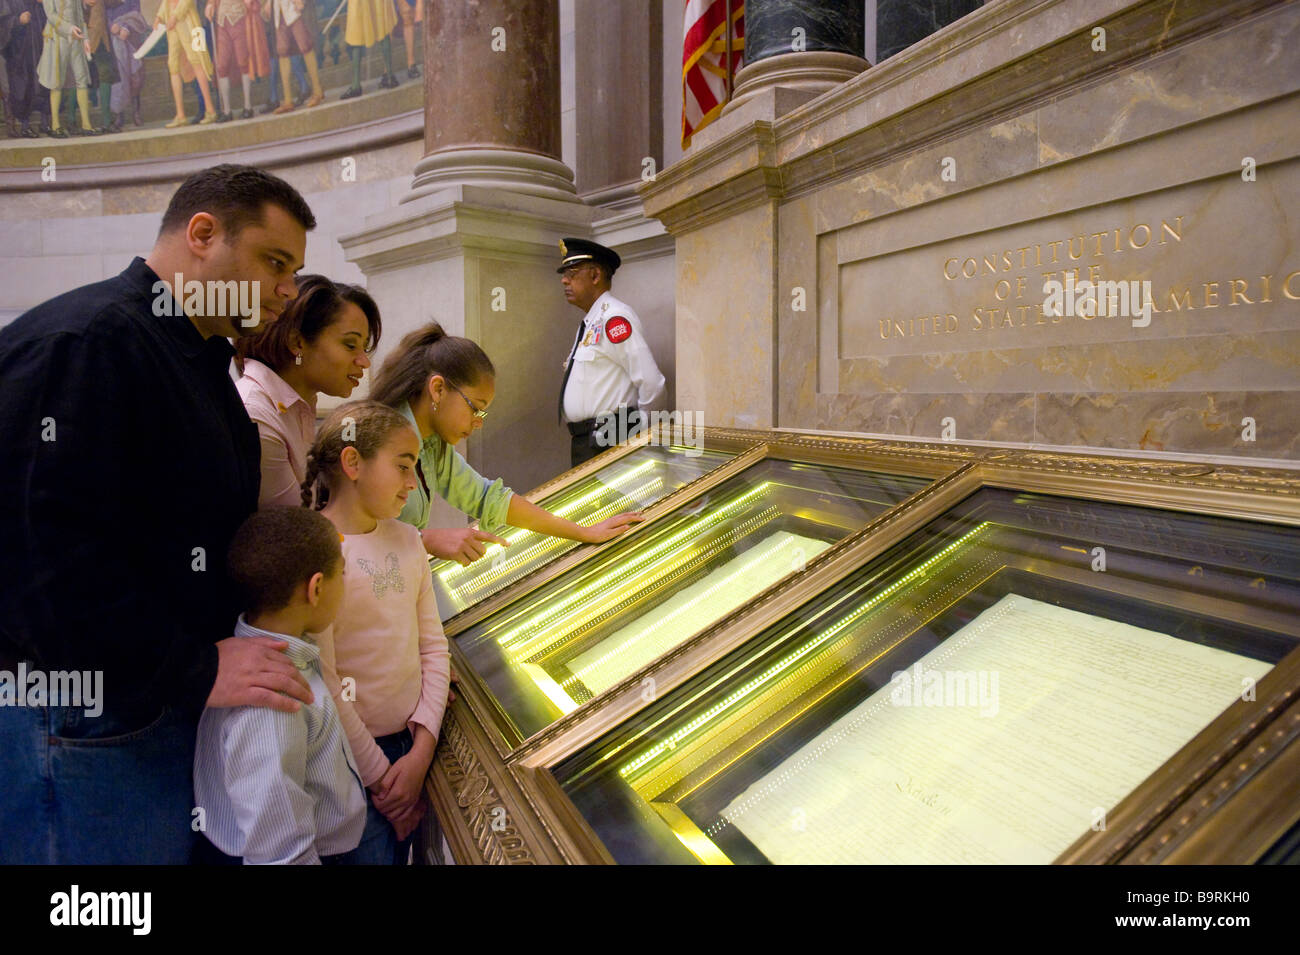 Washington DC The National Archives Rotunda family viewing the Constitution of the United Sates of America Stock Photo